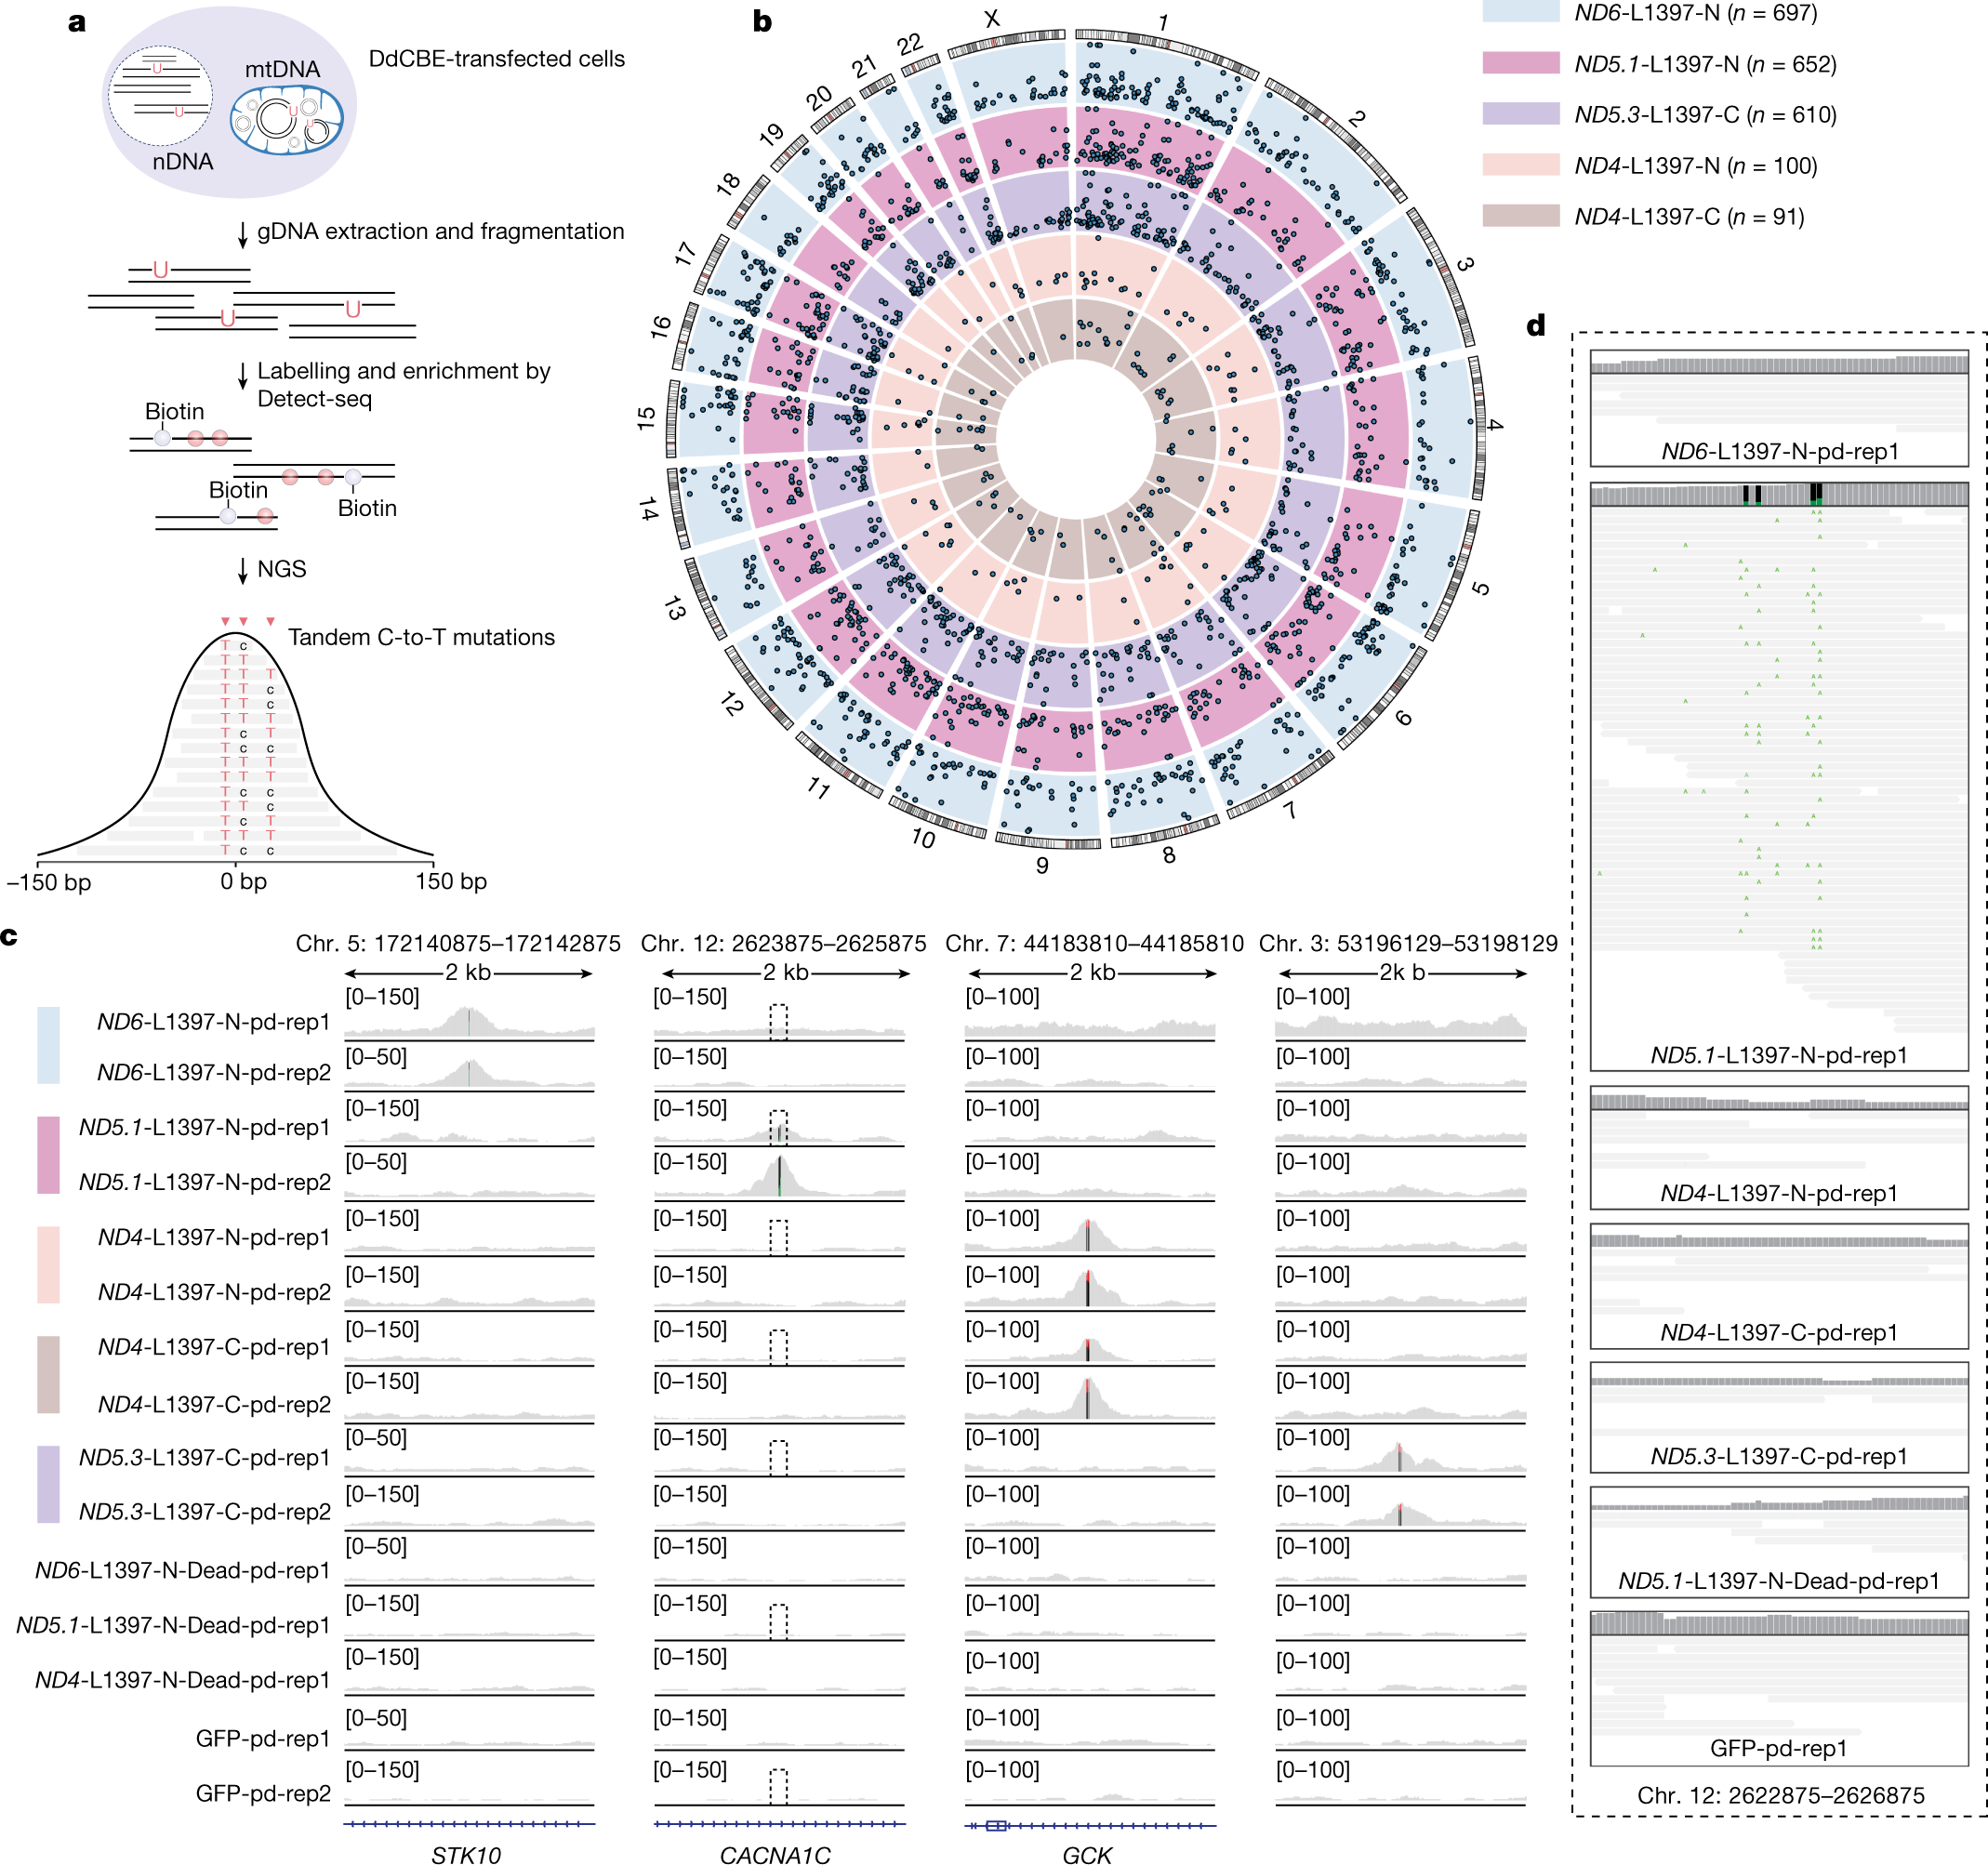 Mitochondrial base editor induces substantial nuclear off-target mutations  | Nature